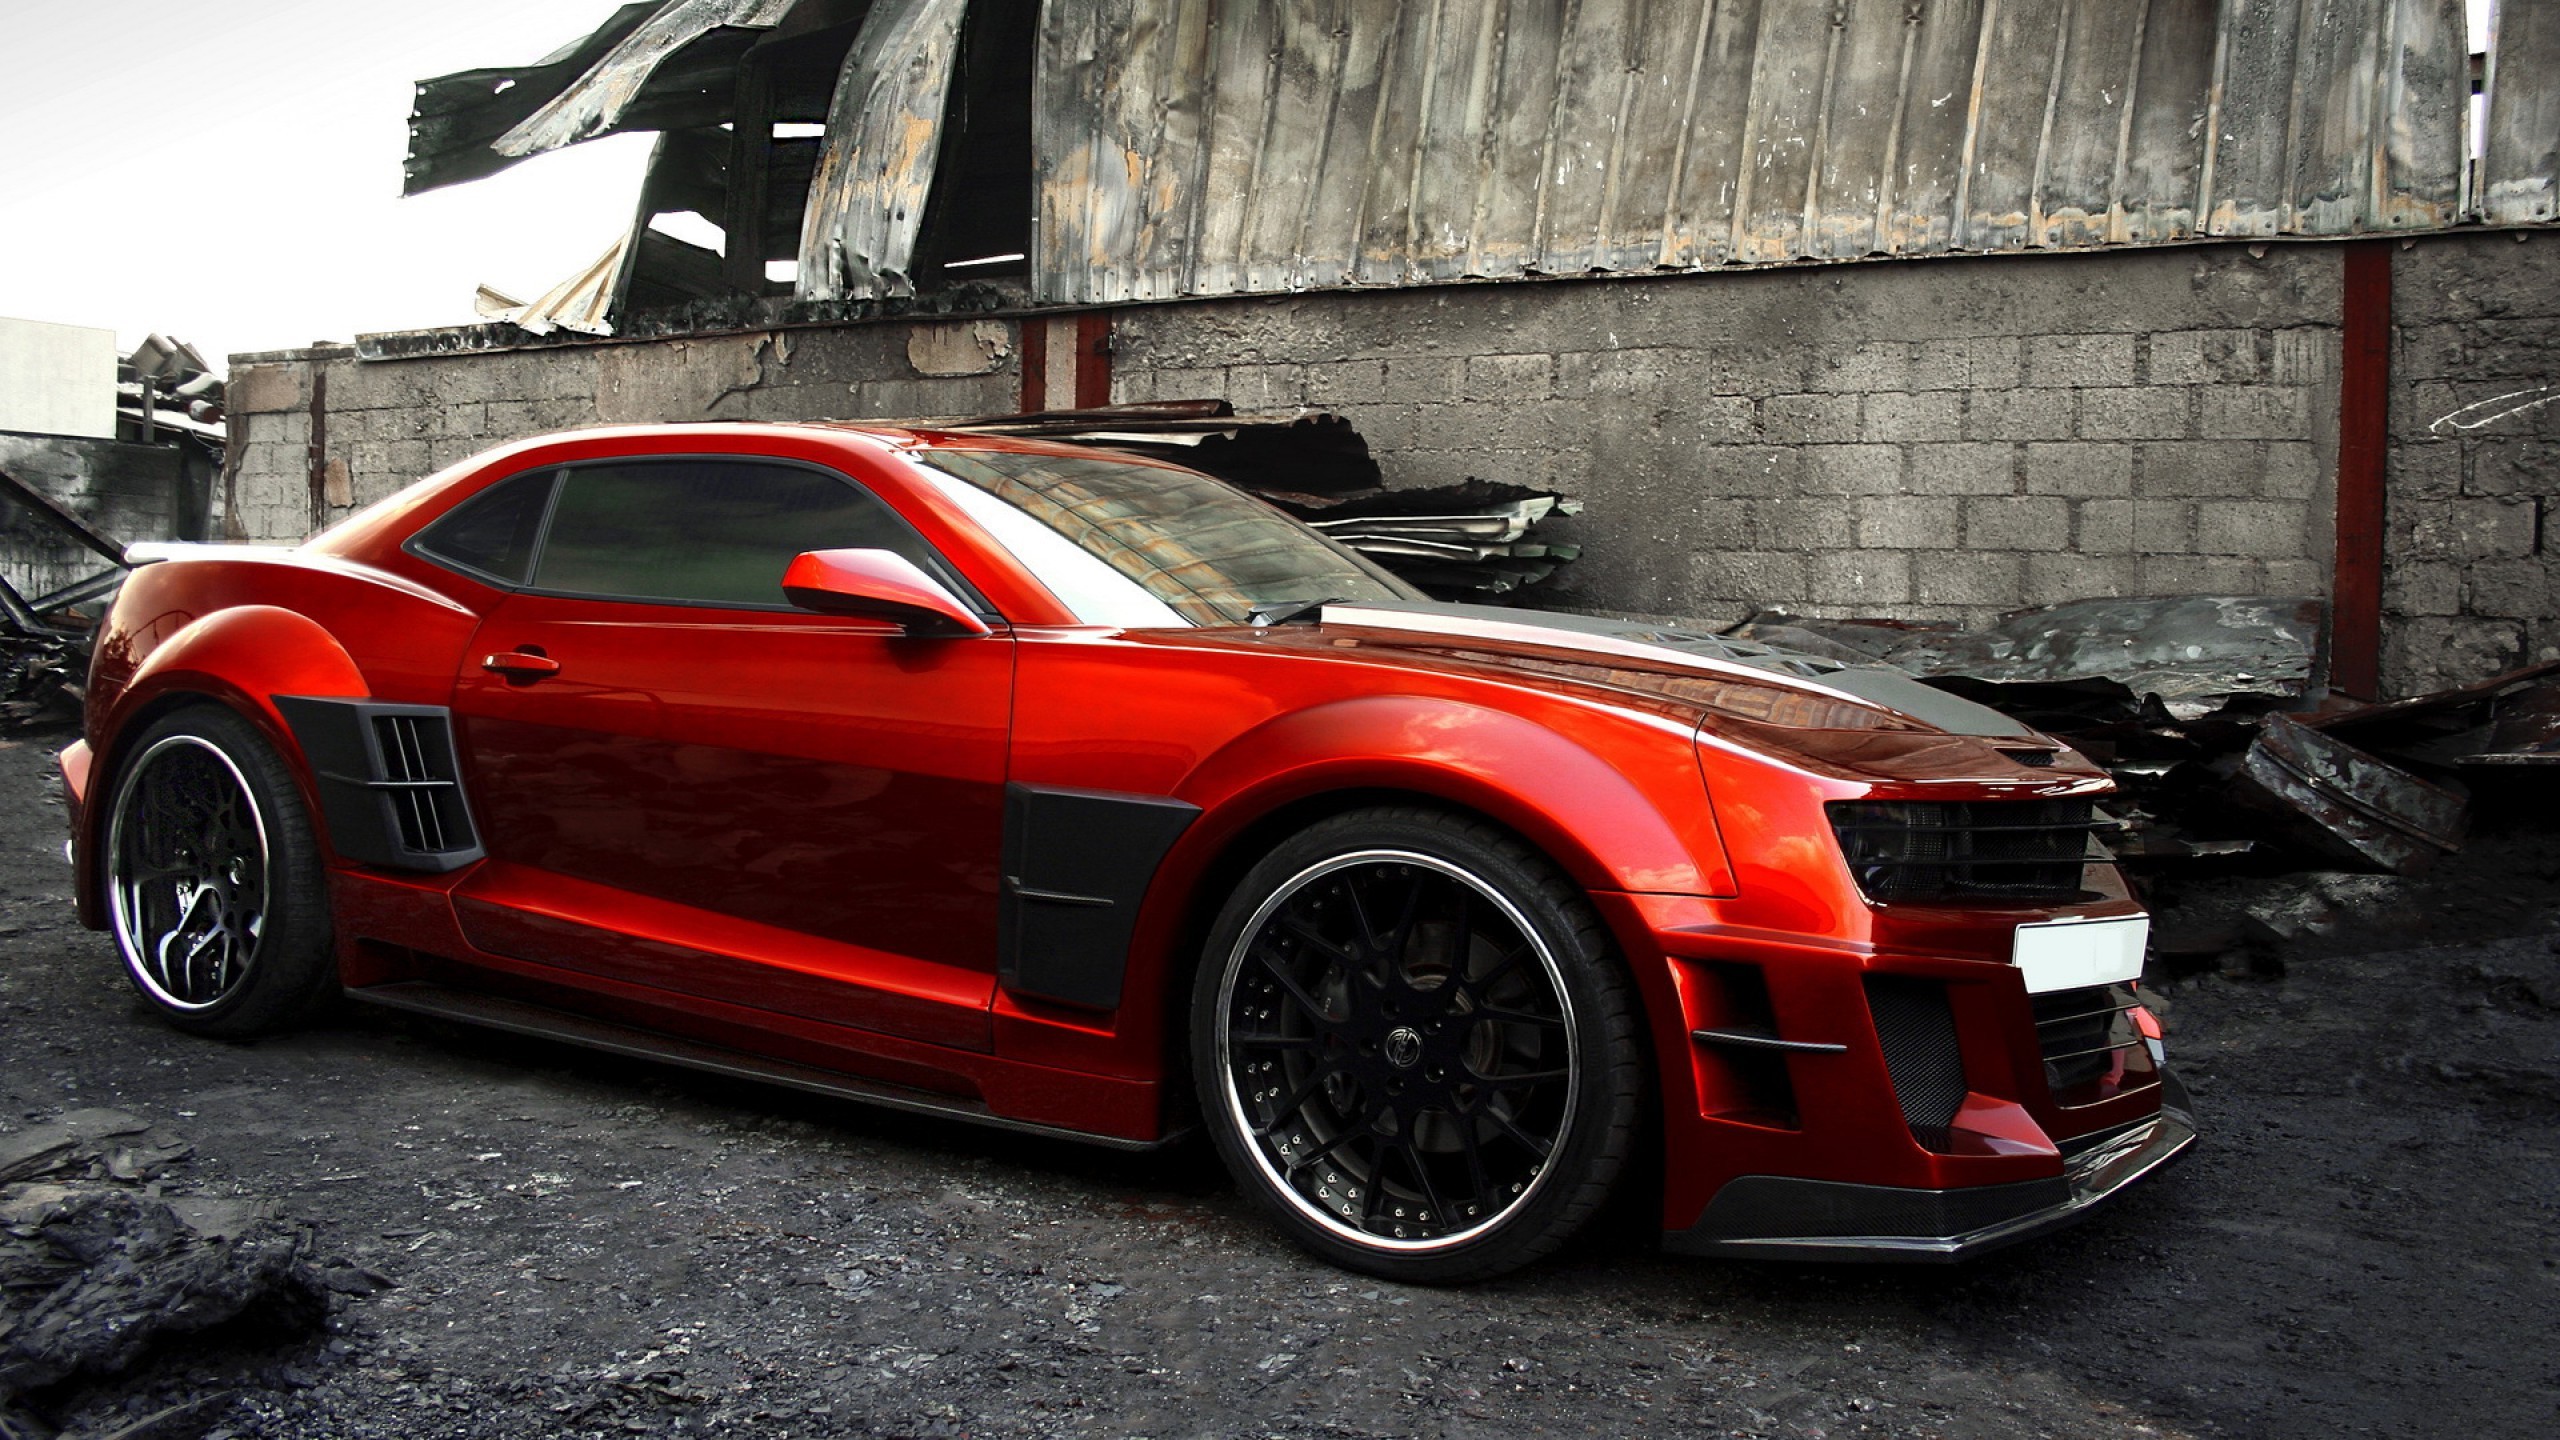 2560x1440 Glossy Red Chevy Desktop Background. Download  ...